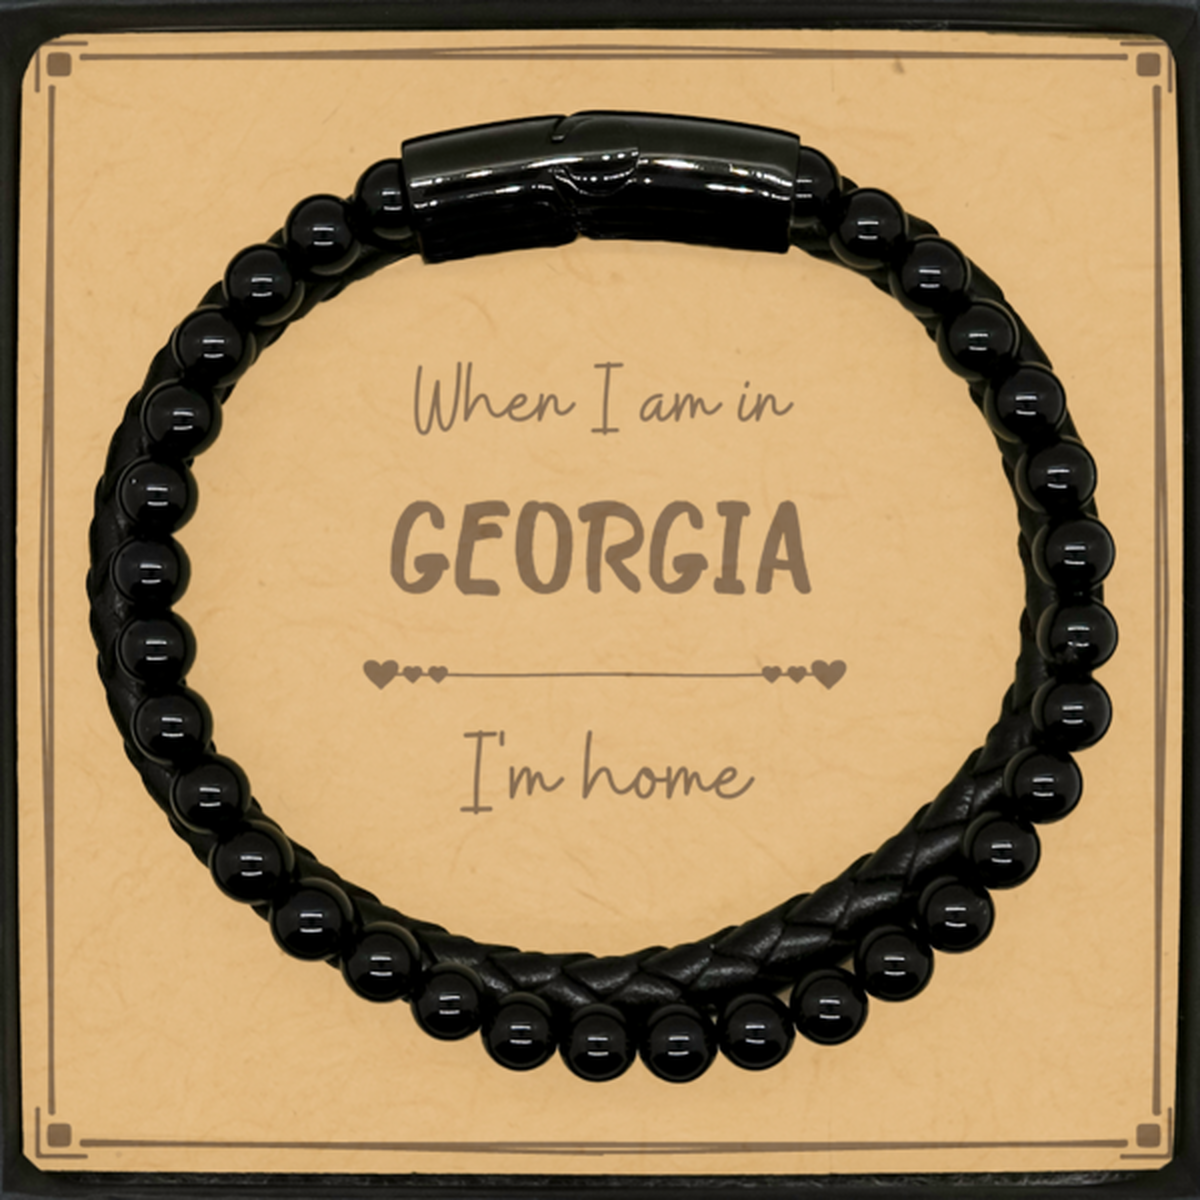 When I am in Georgia I'm home Stone Leather Bracelets, Message Card Gifts For Georgia, State Georgia Birthday Gifts for Friends Coworker